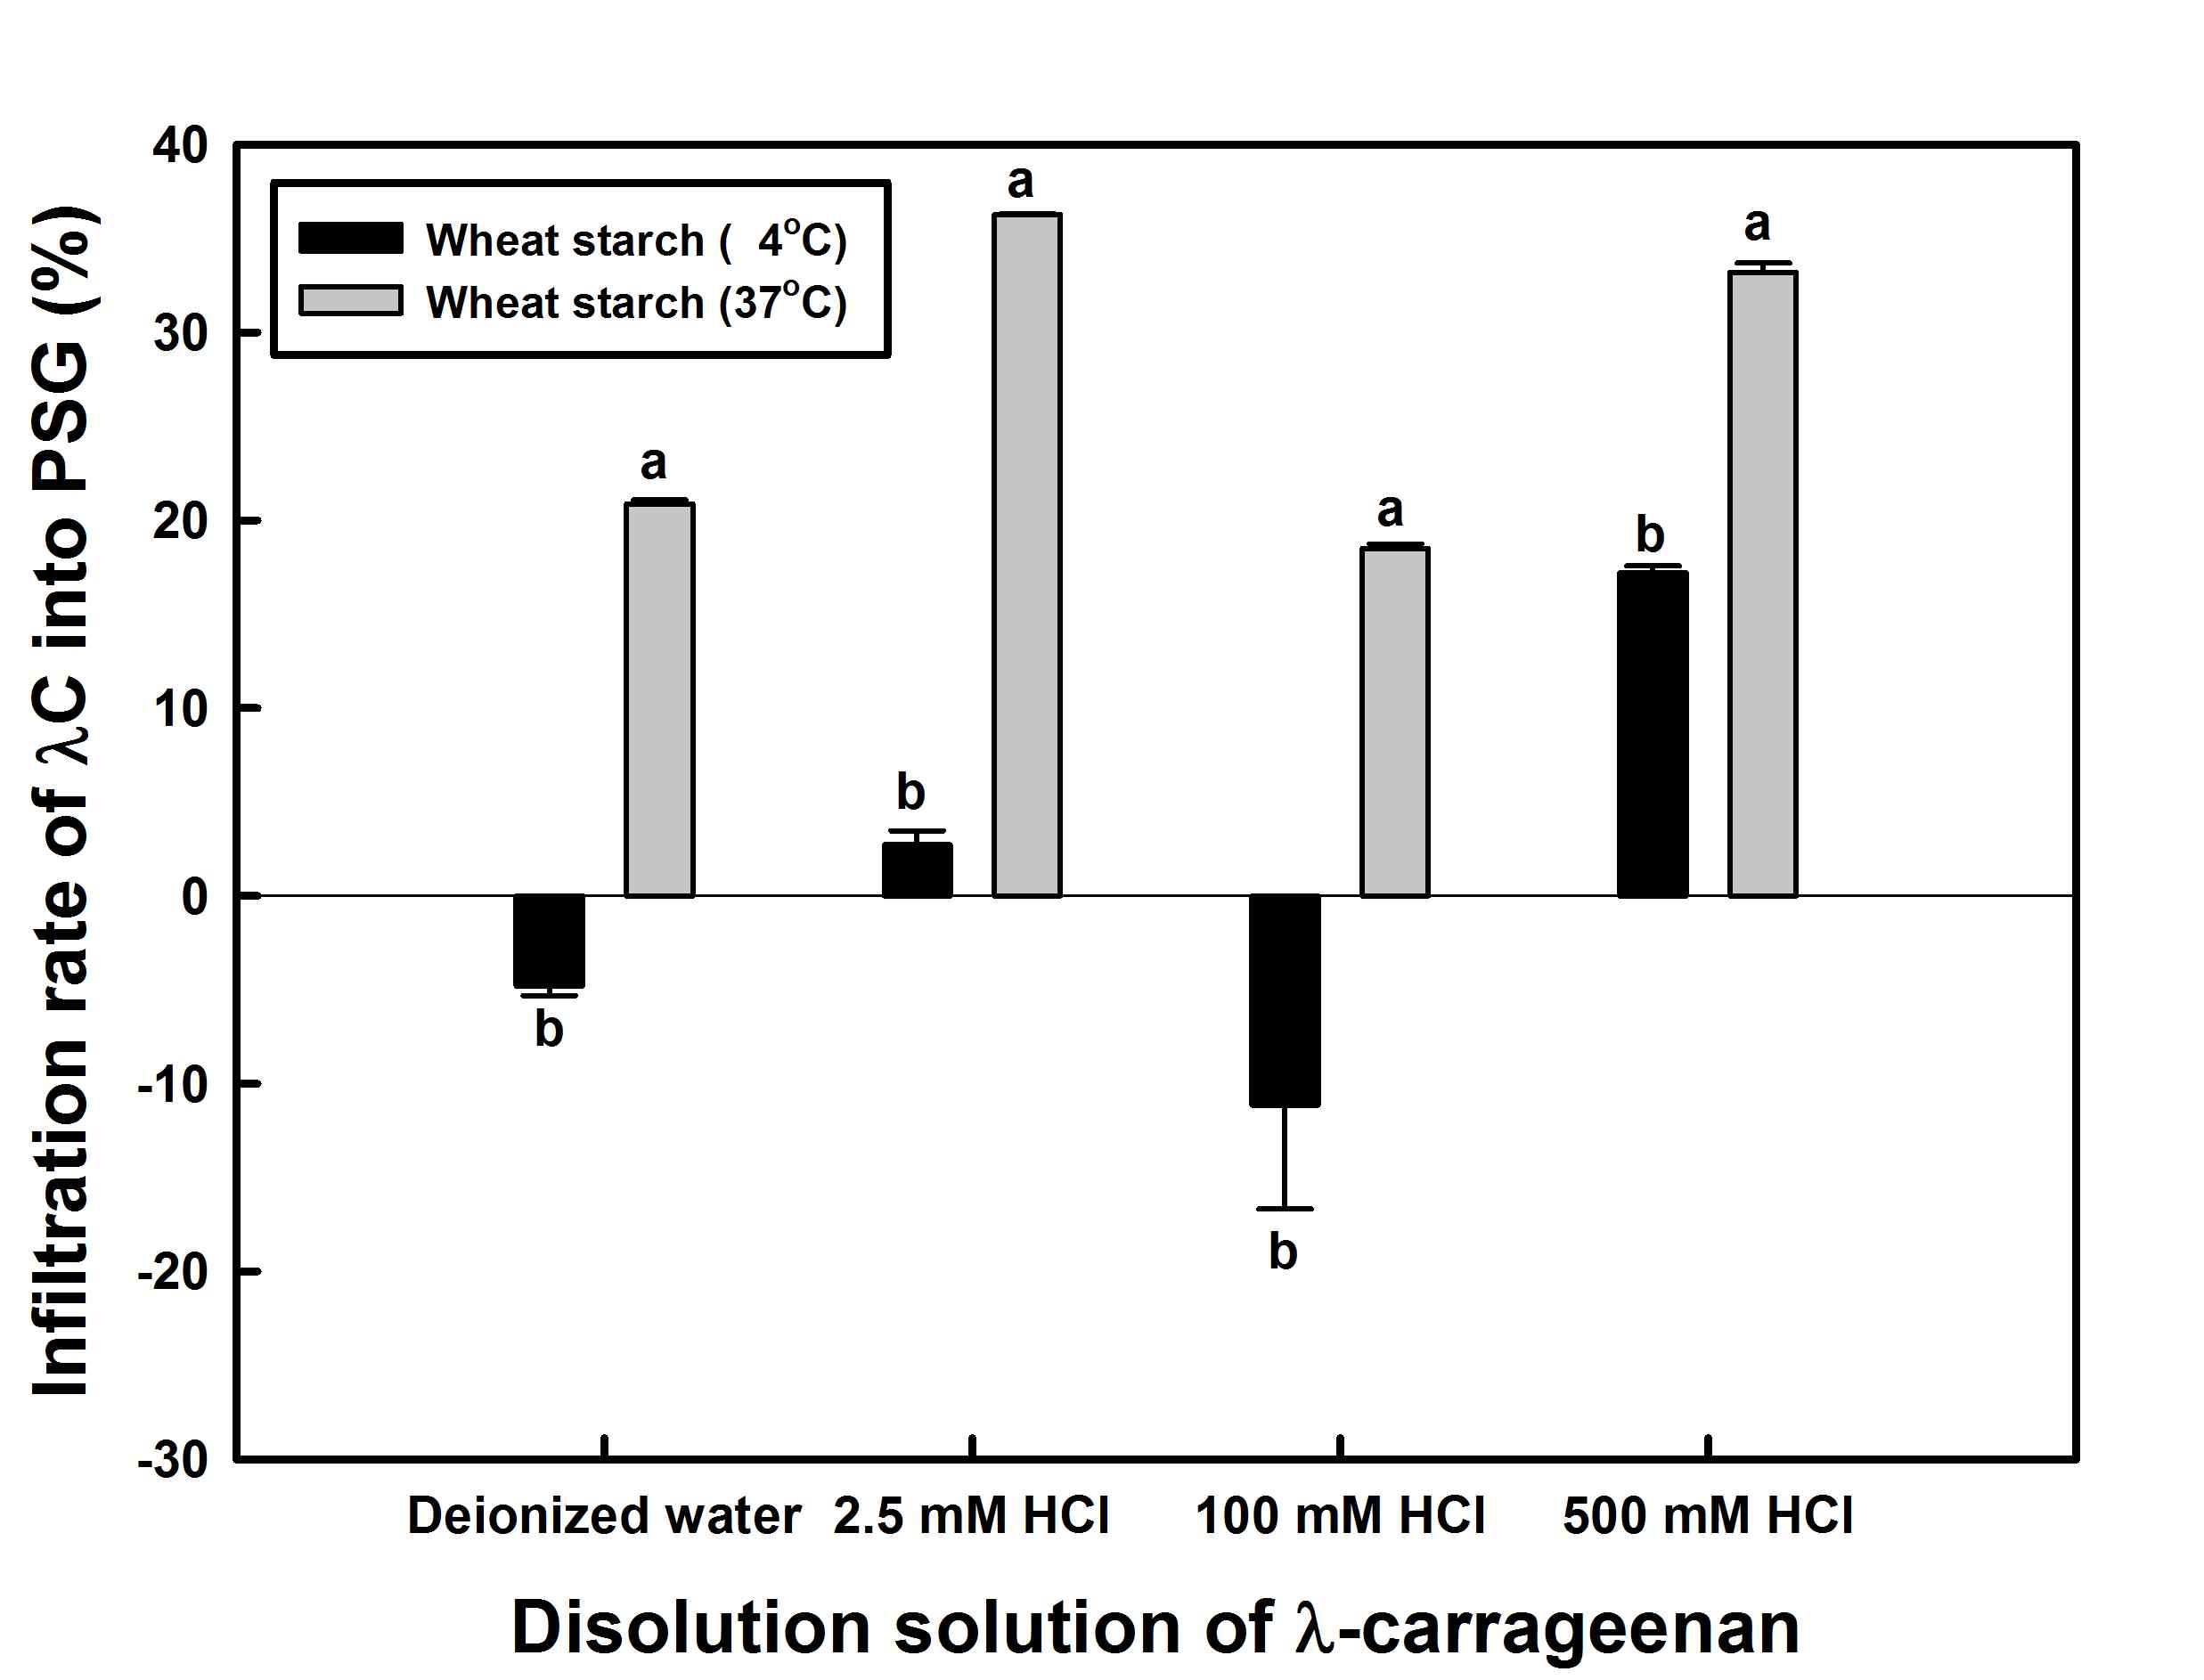 Effects of λ-carrageenan depolymerization on infiltration rate of λ-carrageenan (λC) into wheat starch granules treated at 4 and 37℃ with pronase (PSG). Bars sharing the same lowercase letters within dissolution solution of λ-carrageenan in a figure are not significantly different at p<0.05